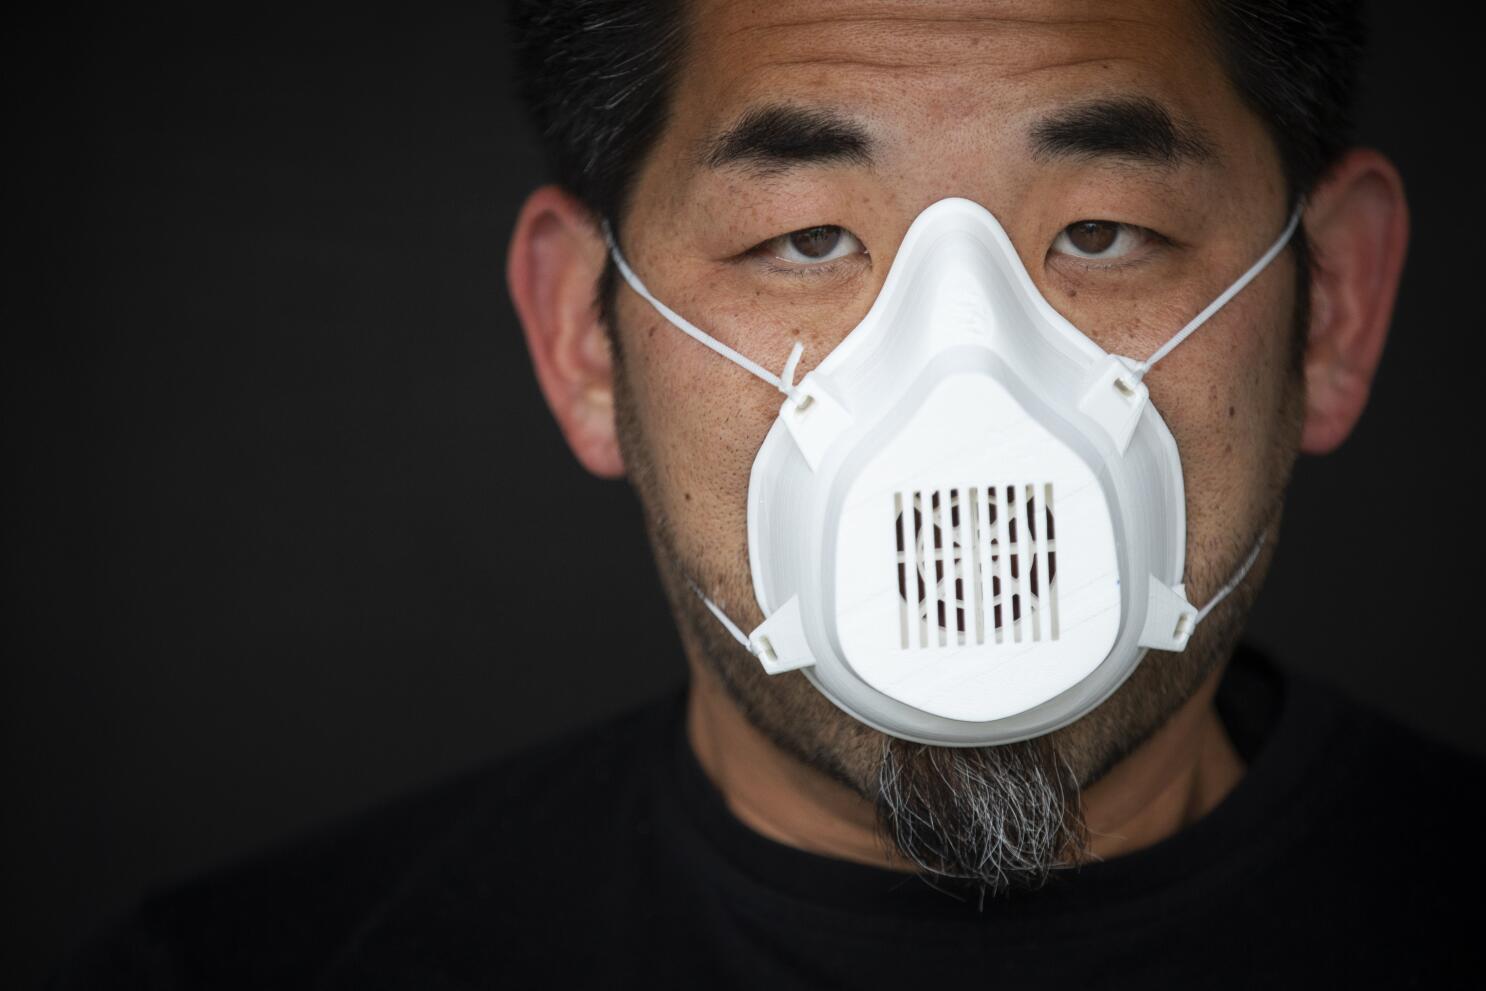 Would You Wear a Nose Mask? New COVID-19 Protective Gear Developed